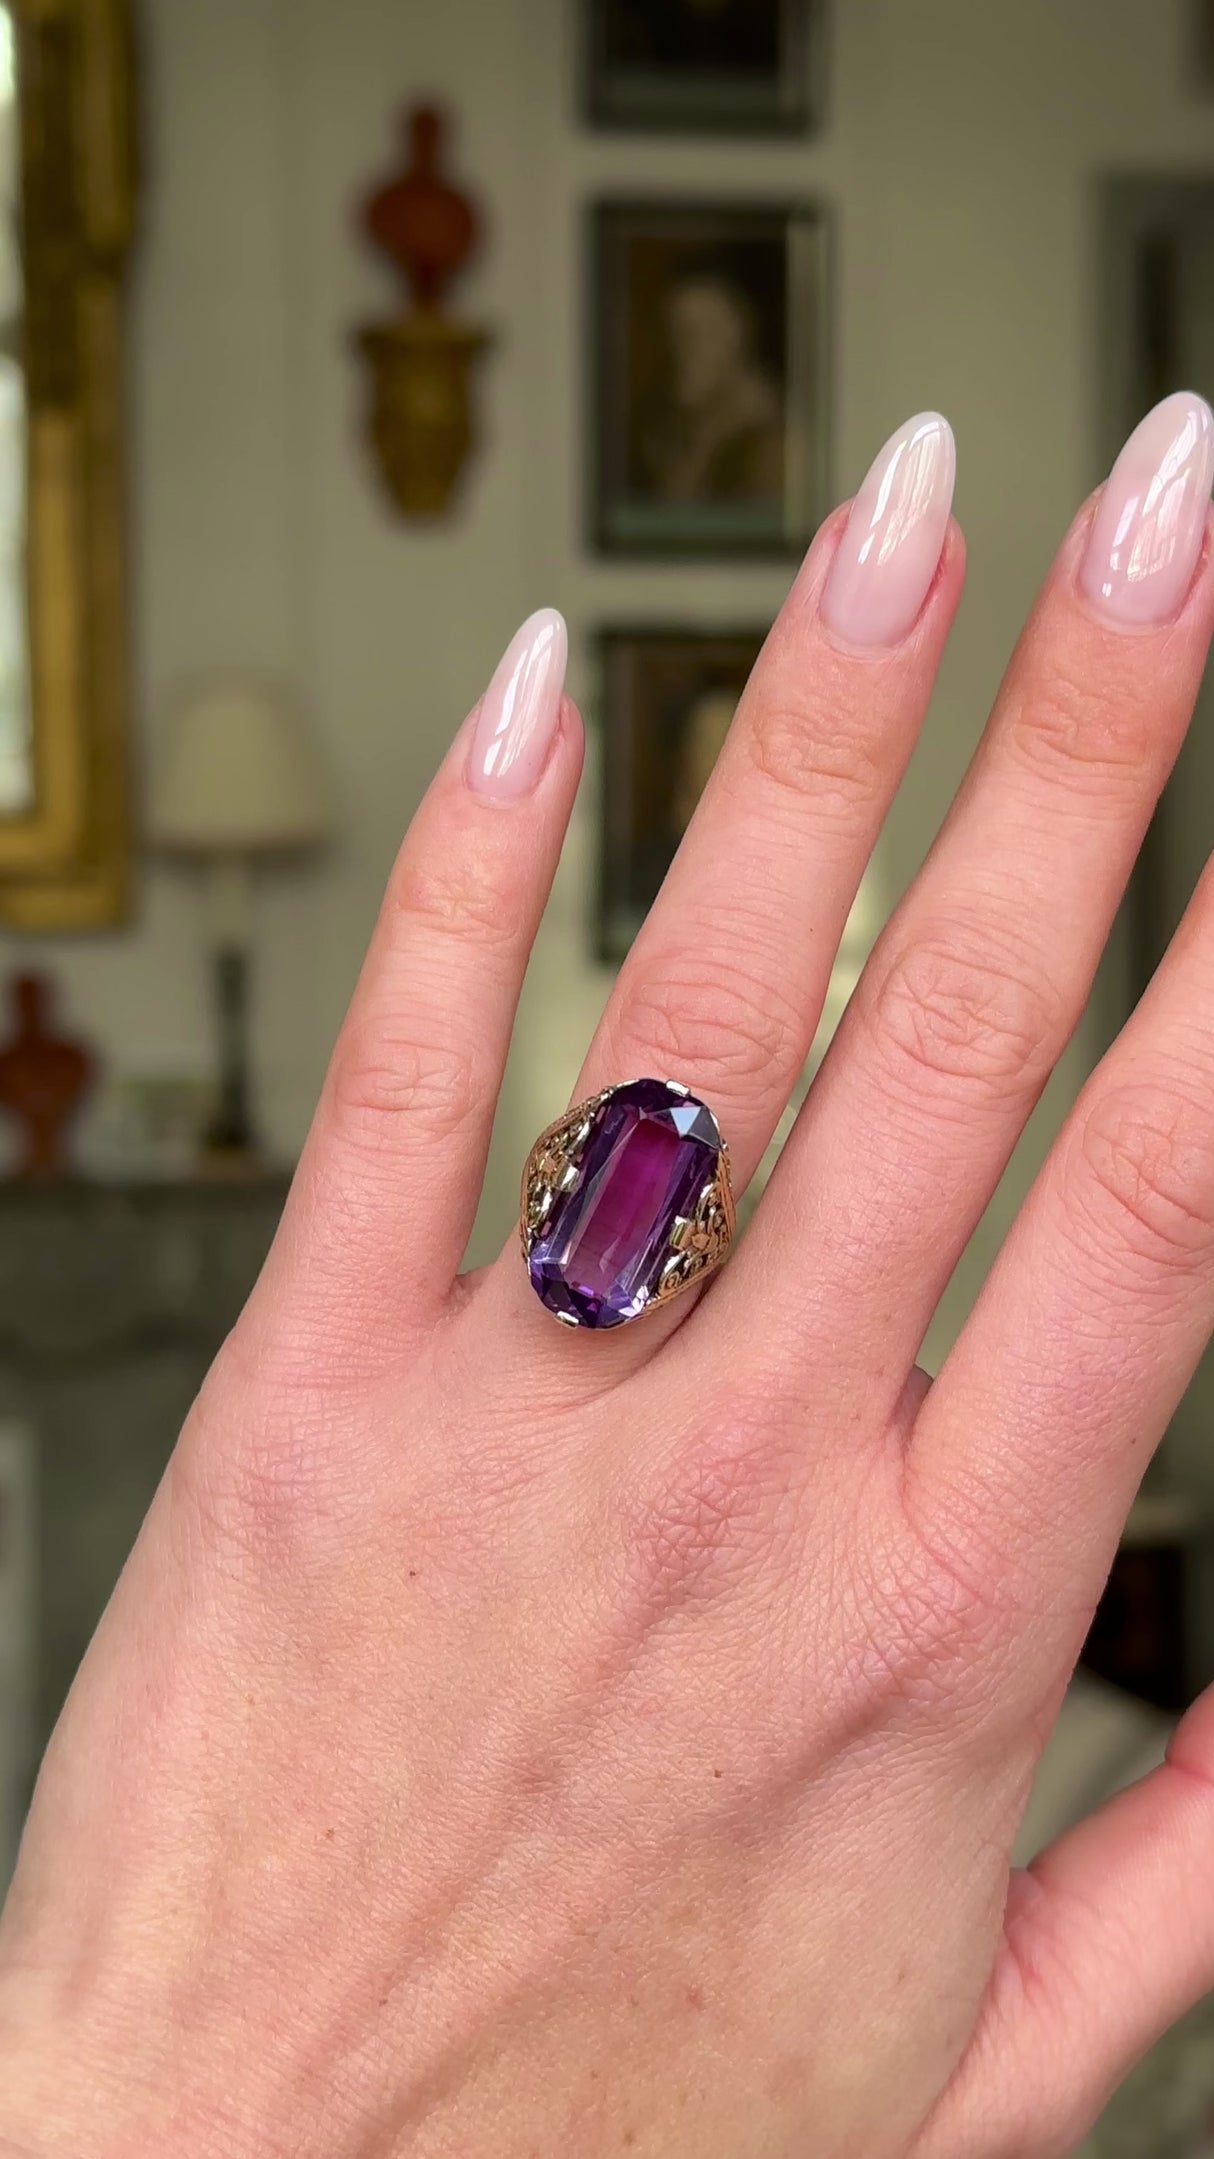 Victorian amethyst and 14ct yellow gold ring worn on hand and moved around to give perspective.